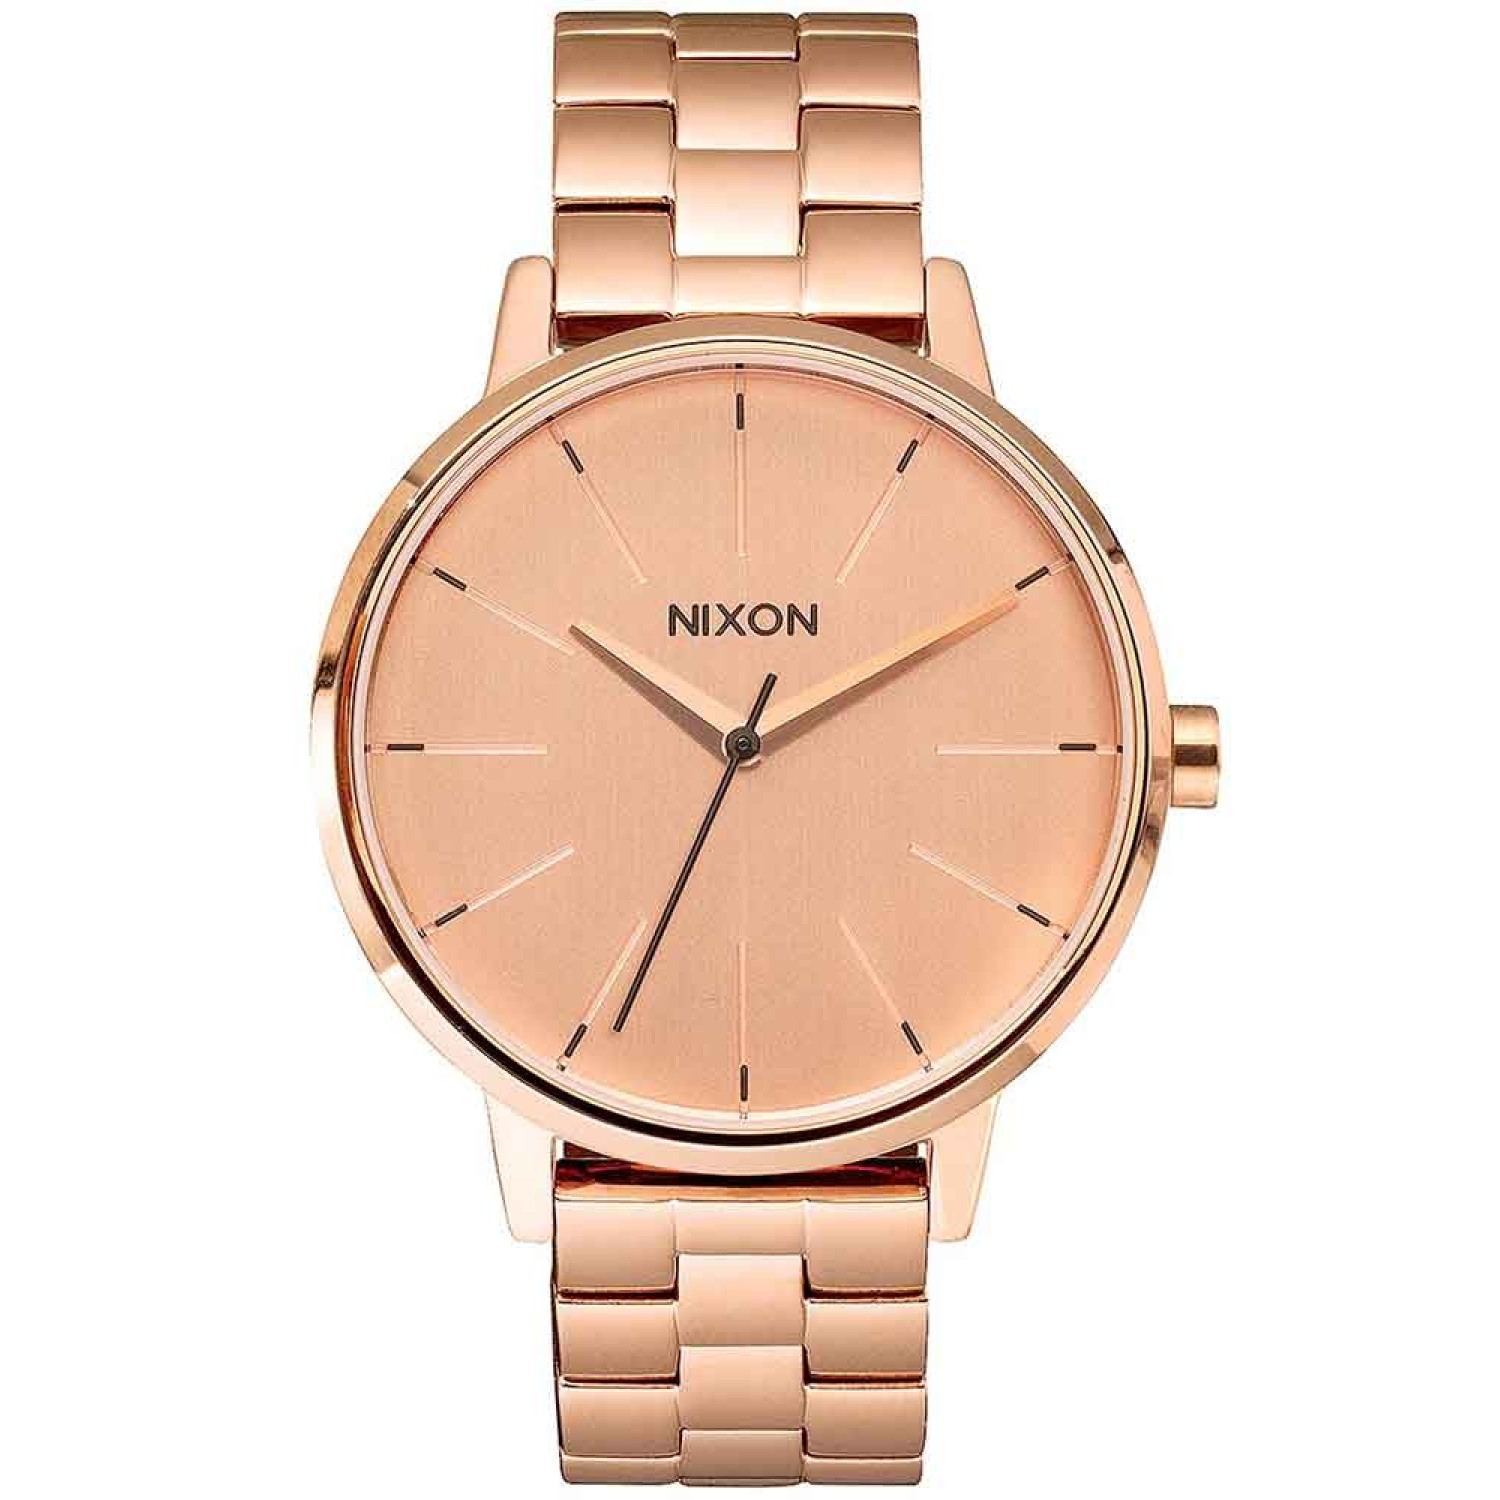 A099897 NIXON Ladies The Kensington Rose Gold Watch. The Ladies Nixon A099897 Kensington watch in a stylish salmon-coloured design. The elegant round dial features high-visibility hands and baton markers 2 Year  Guarantee 3 Months No Payments and Interest